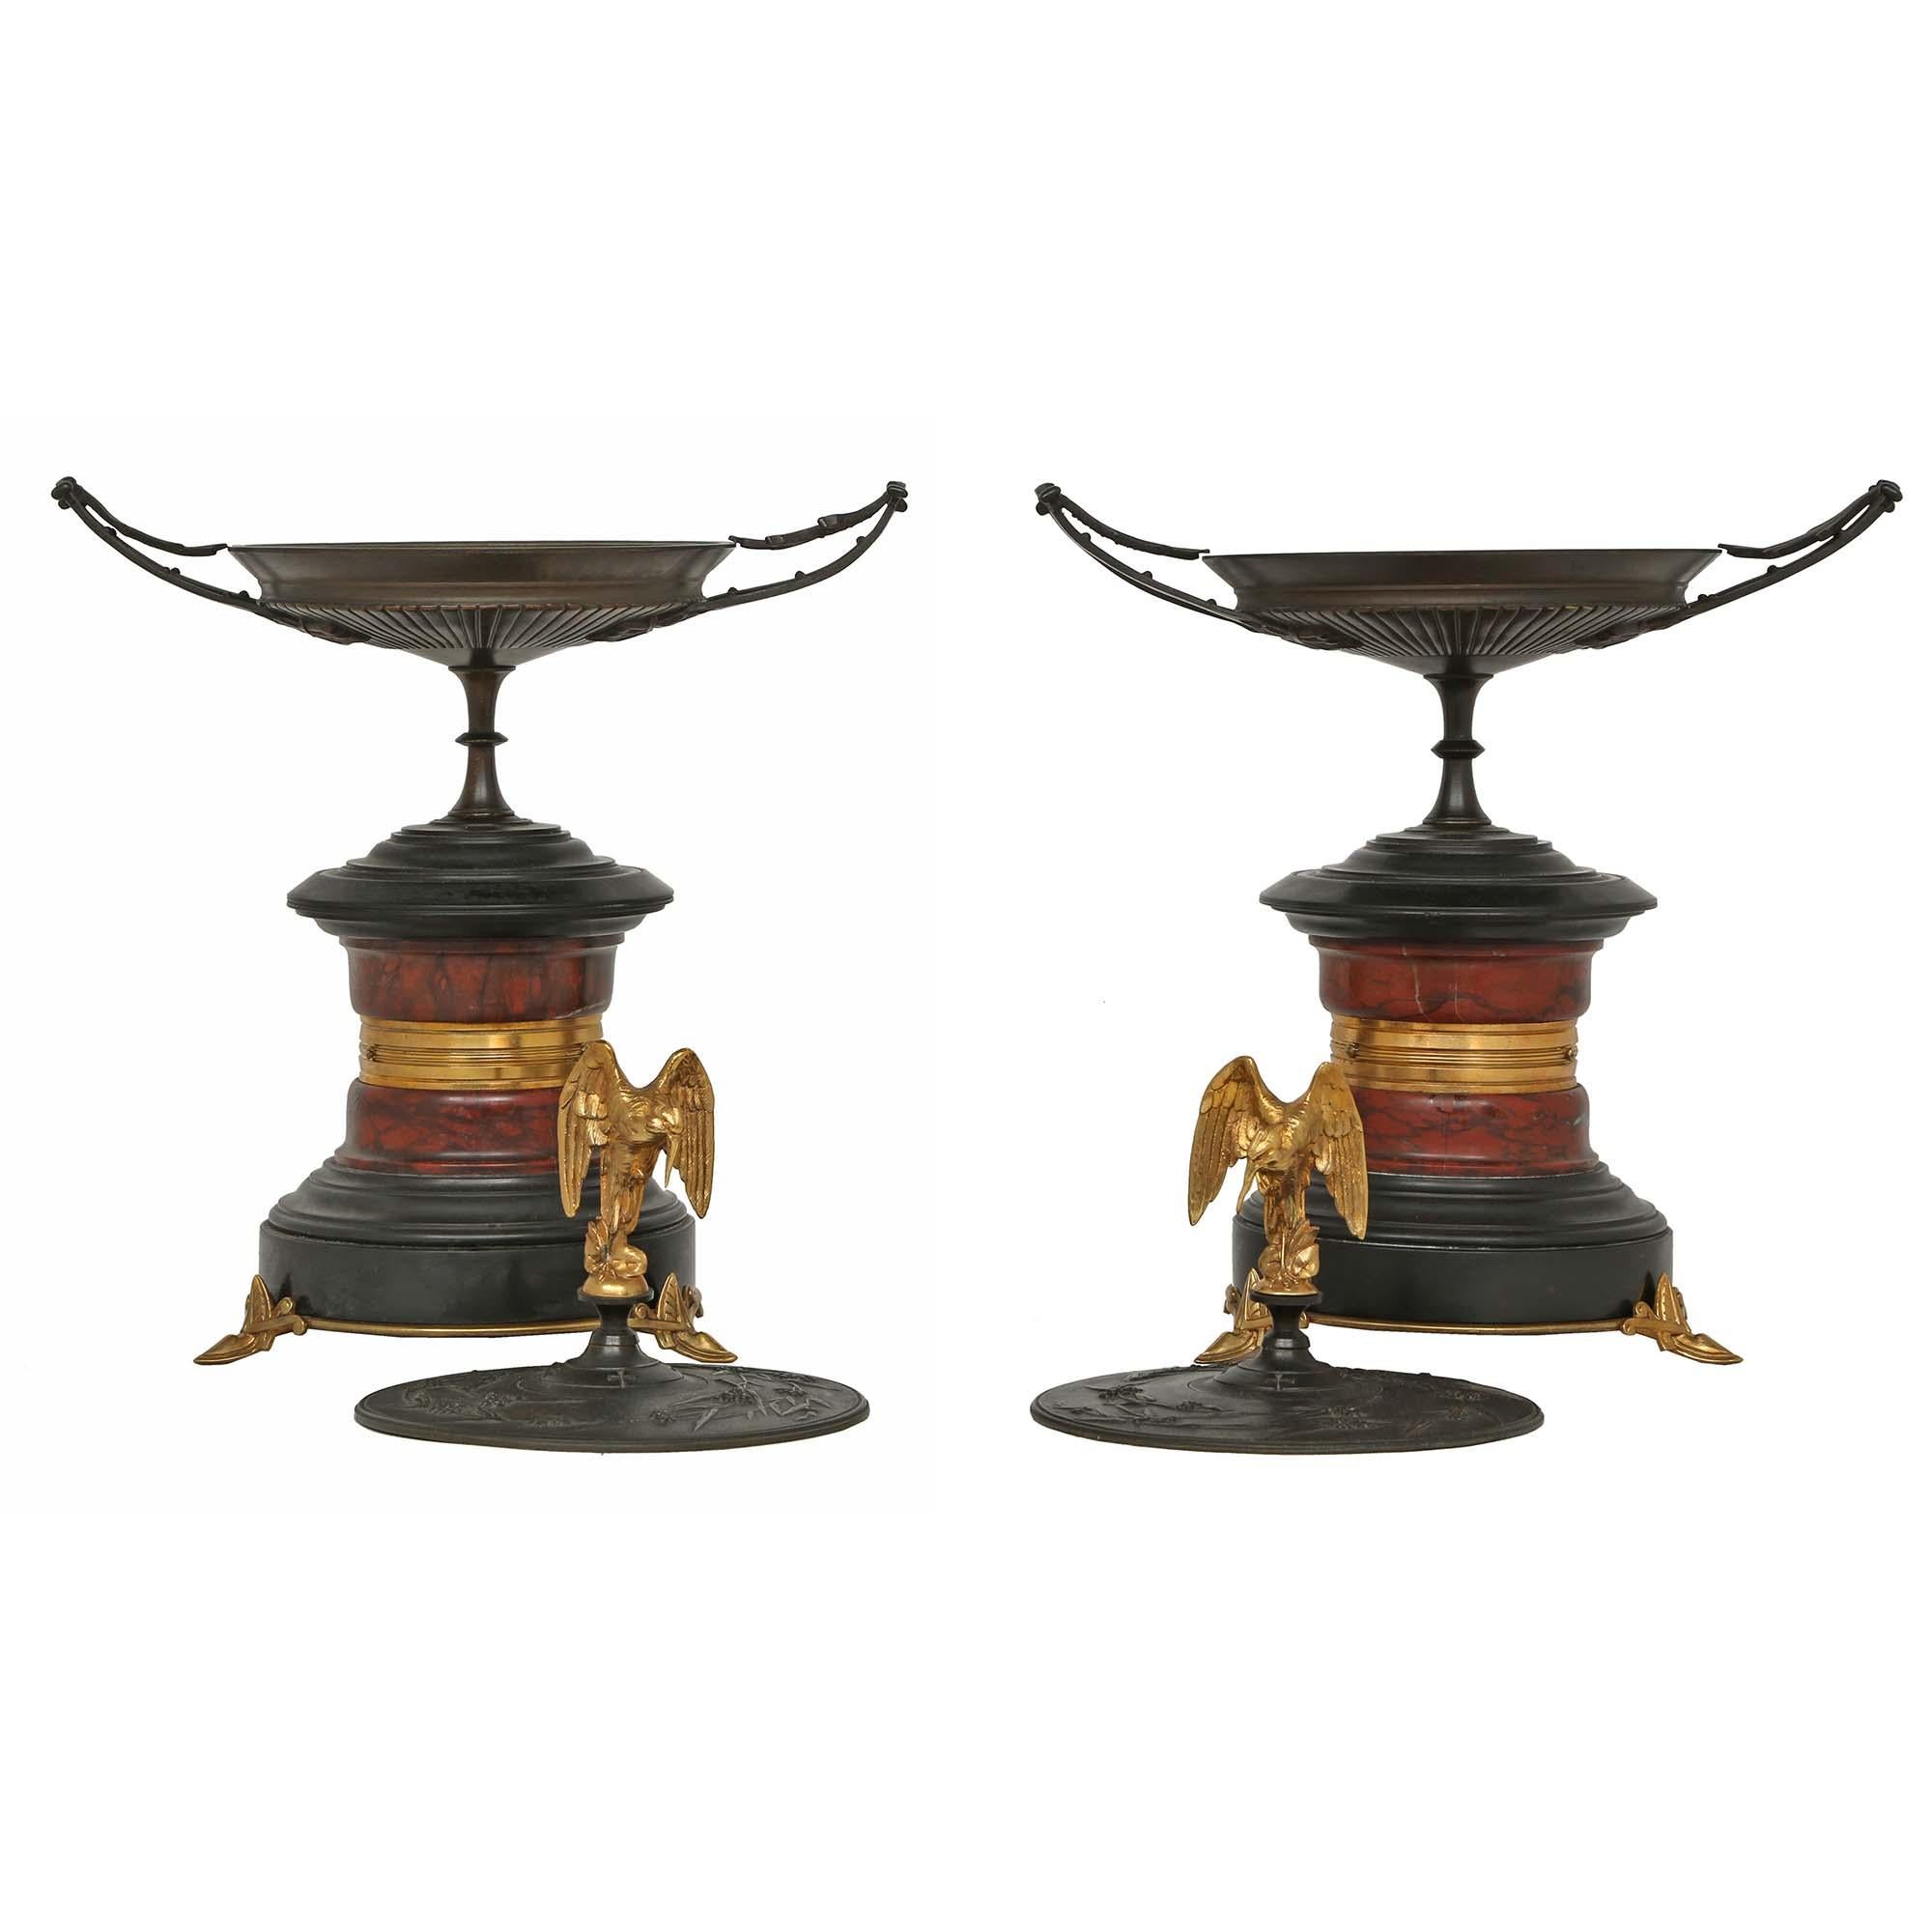 A Fine pair of French 19th century, bronze, marble and ormolu tazzas, with lids. The pair are raised by Egyptian designed ormolu supports below a black Belgian, red and black veined marble column, with an ormolu band. The urns, with laurel curved